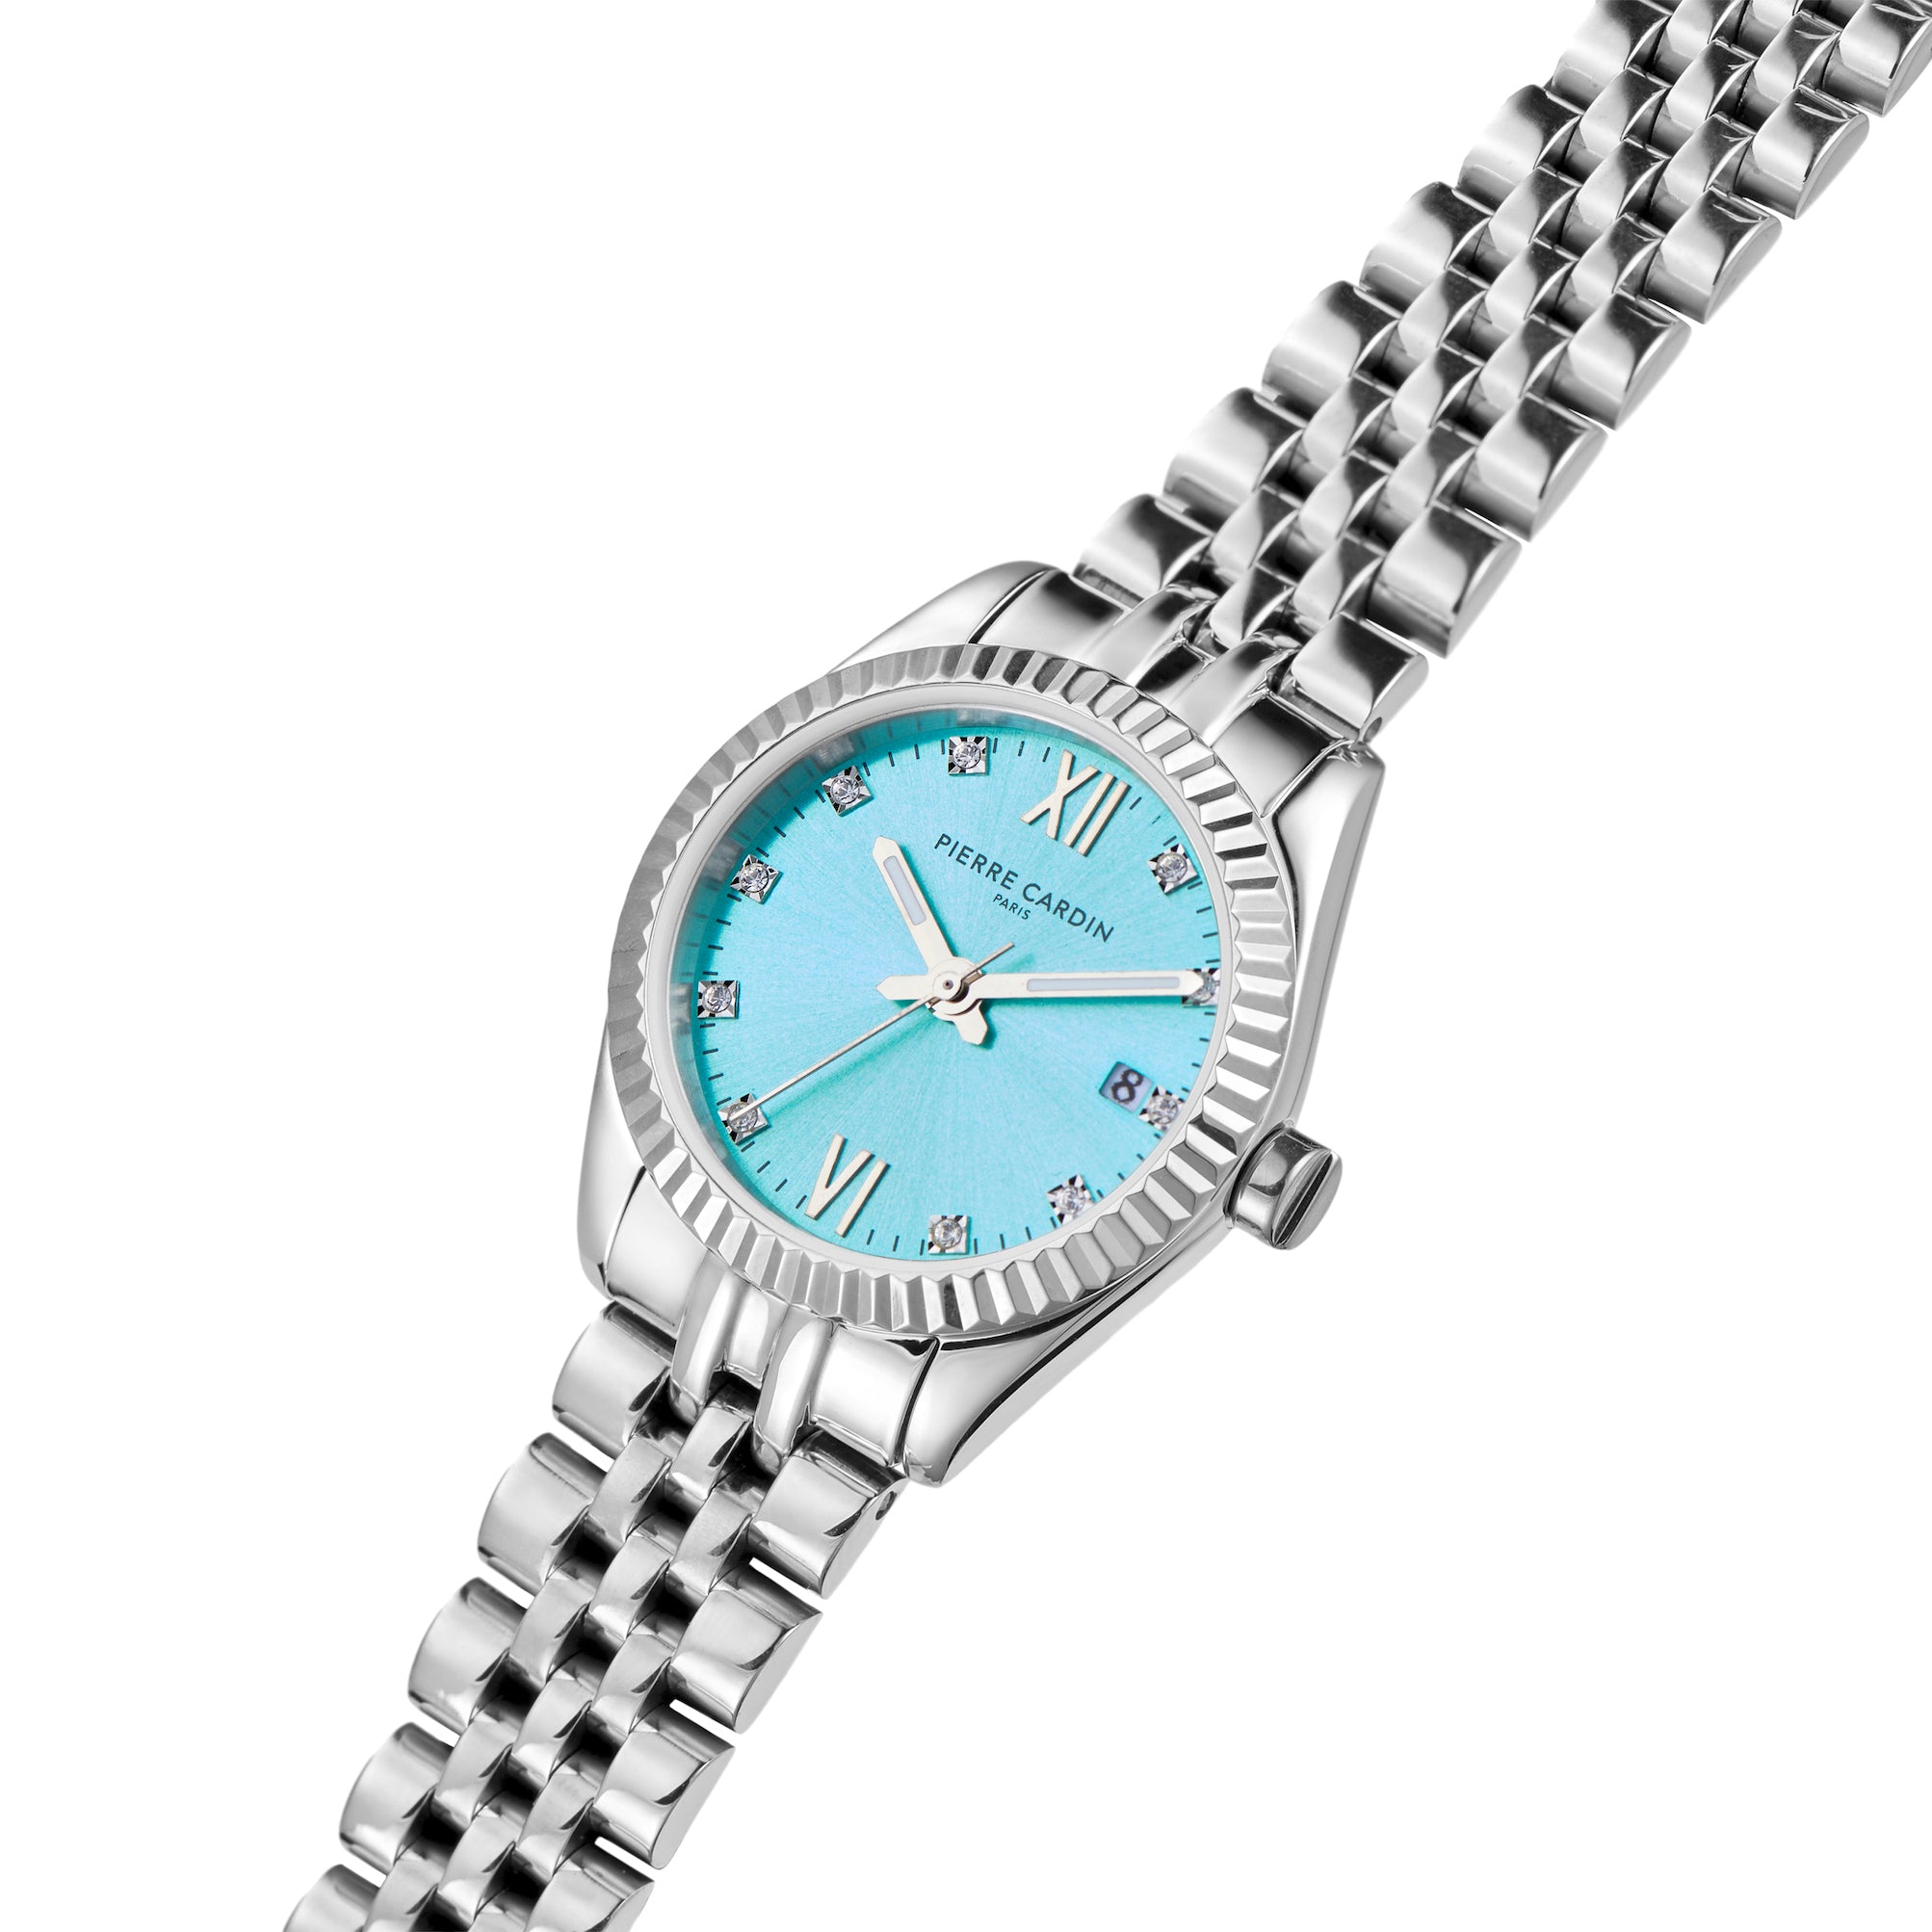 Opera Stainless Steel Date Watch with Fluted Bezel and Crystals on